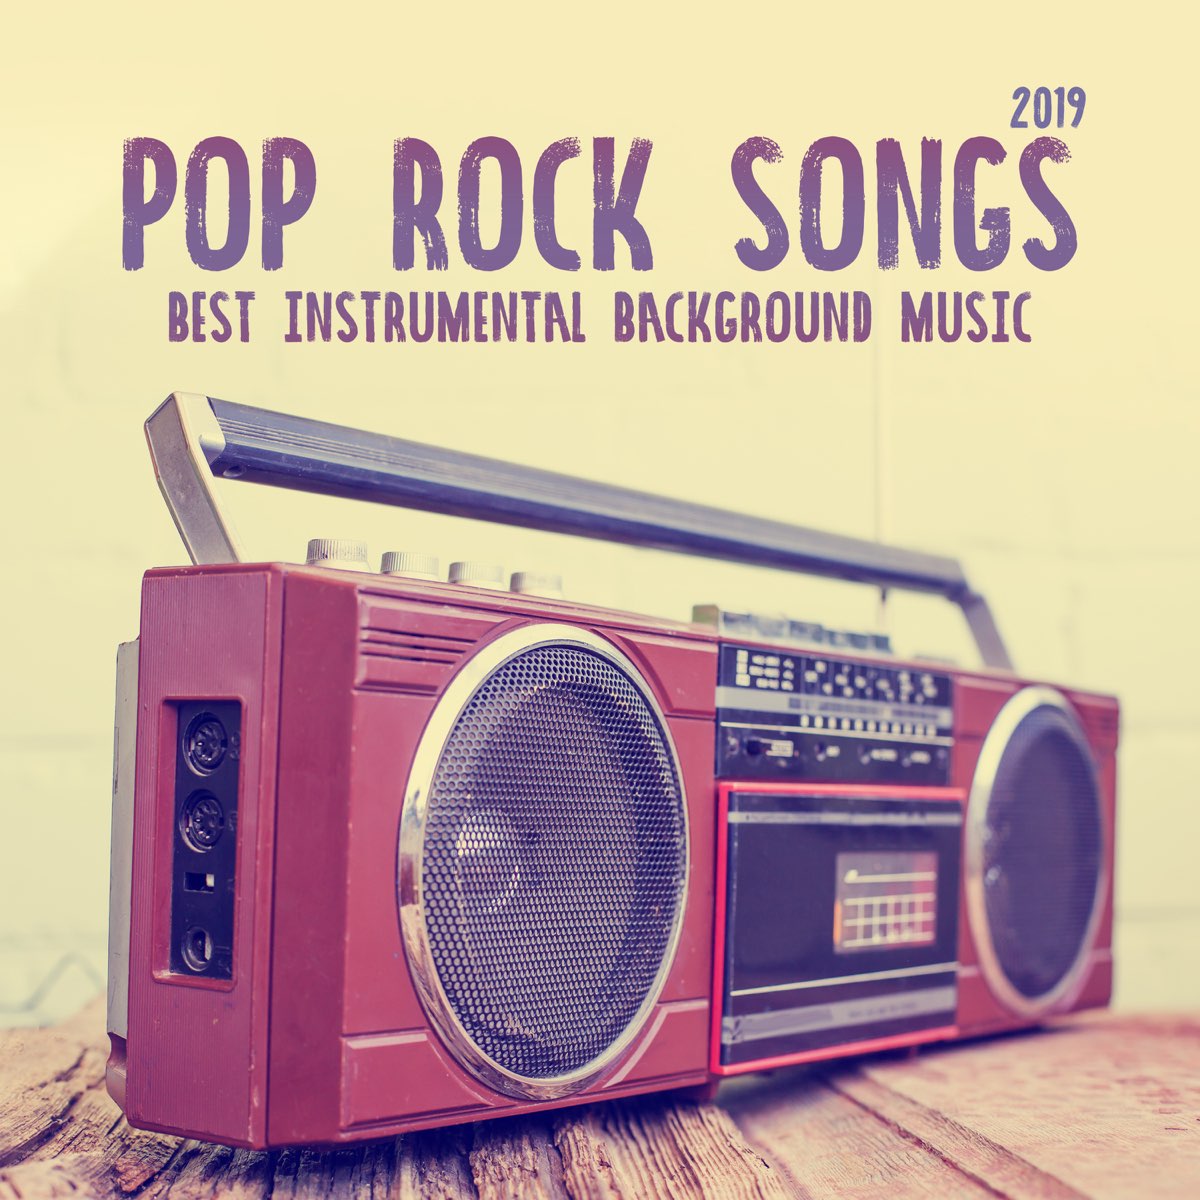 Pop Rock Songs 2019: Best Instrumental Background Music by Gold Brothers  Band, Dj Vibes EDM & background music masters on Apple Music